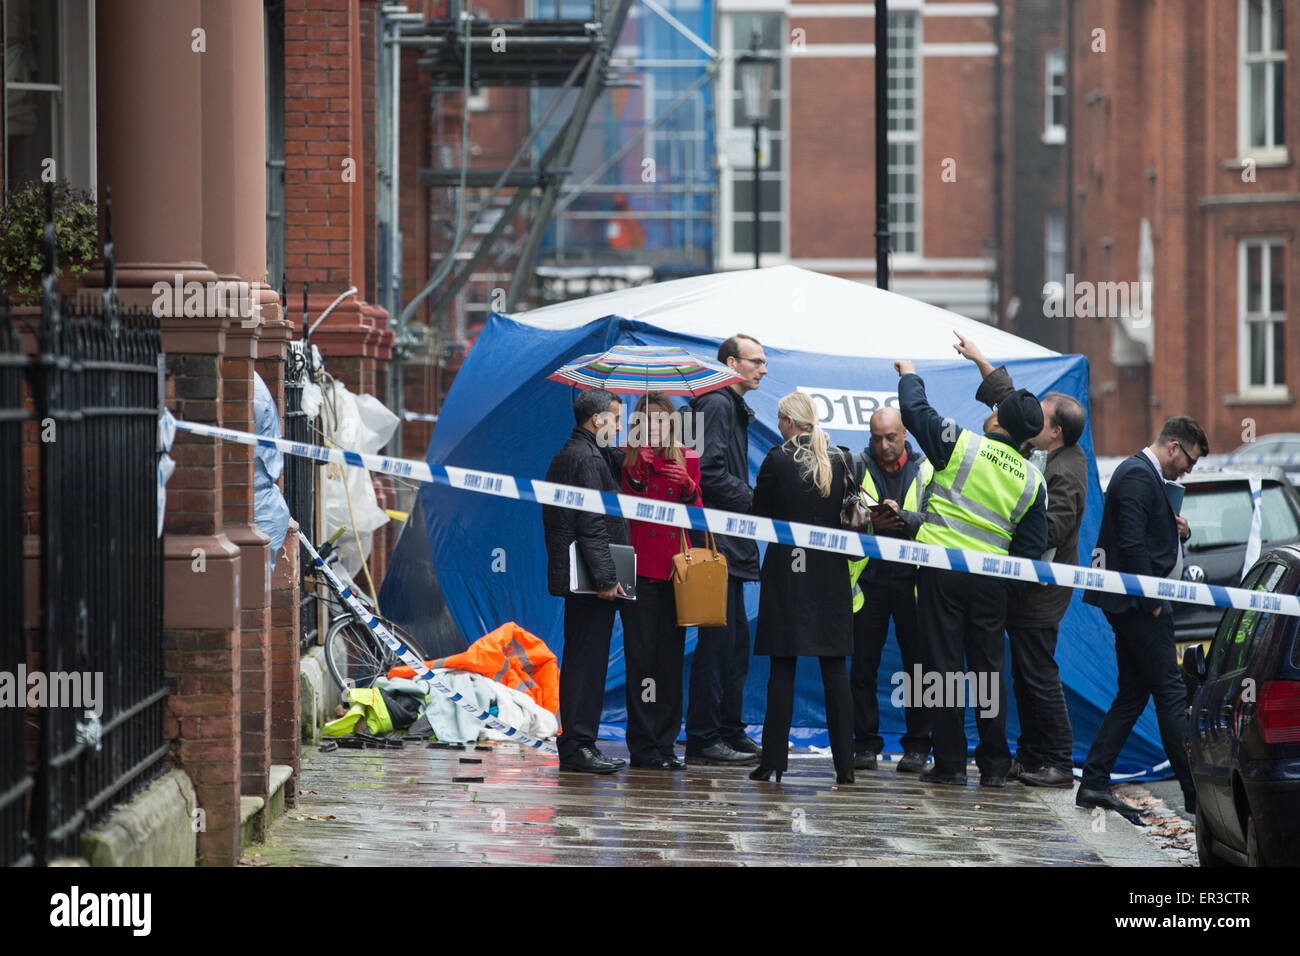 A balcony collapse at Cadogan Square in Knightsbridge, West London has killed 2 men and injured at least 6 other people. District surveyors and a forensic team attend the scene.  Where: London, United Kingdom When: 21 Nov 2014 Credit: Mario Mitsis/WENN.com Stock Photo